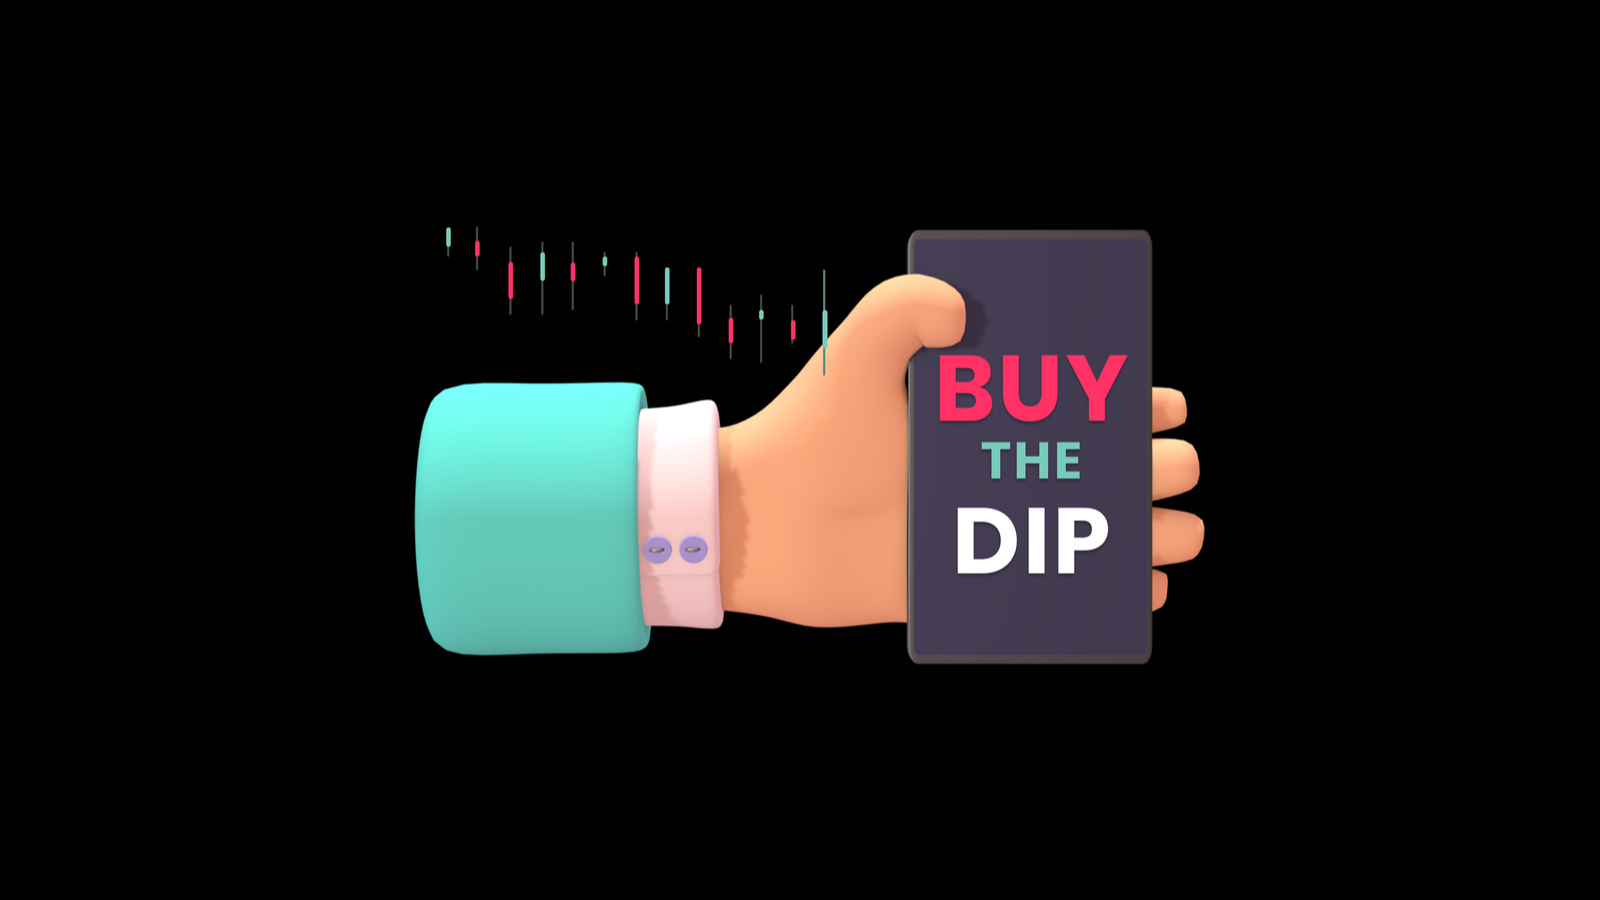 stocks to buy on dip - Don’t Miss Out! 3 Stocks to Buy on Each and Every Dip